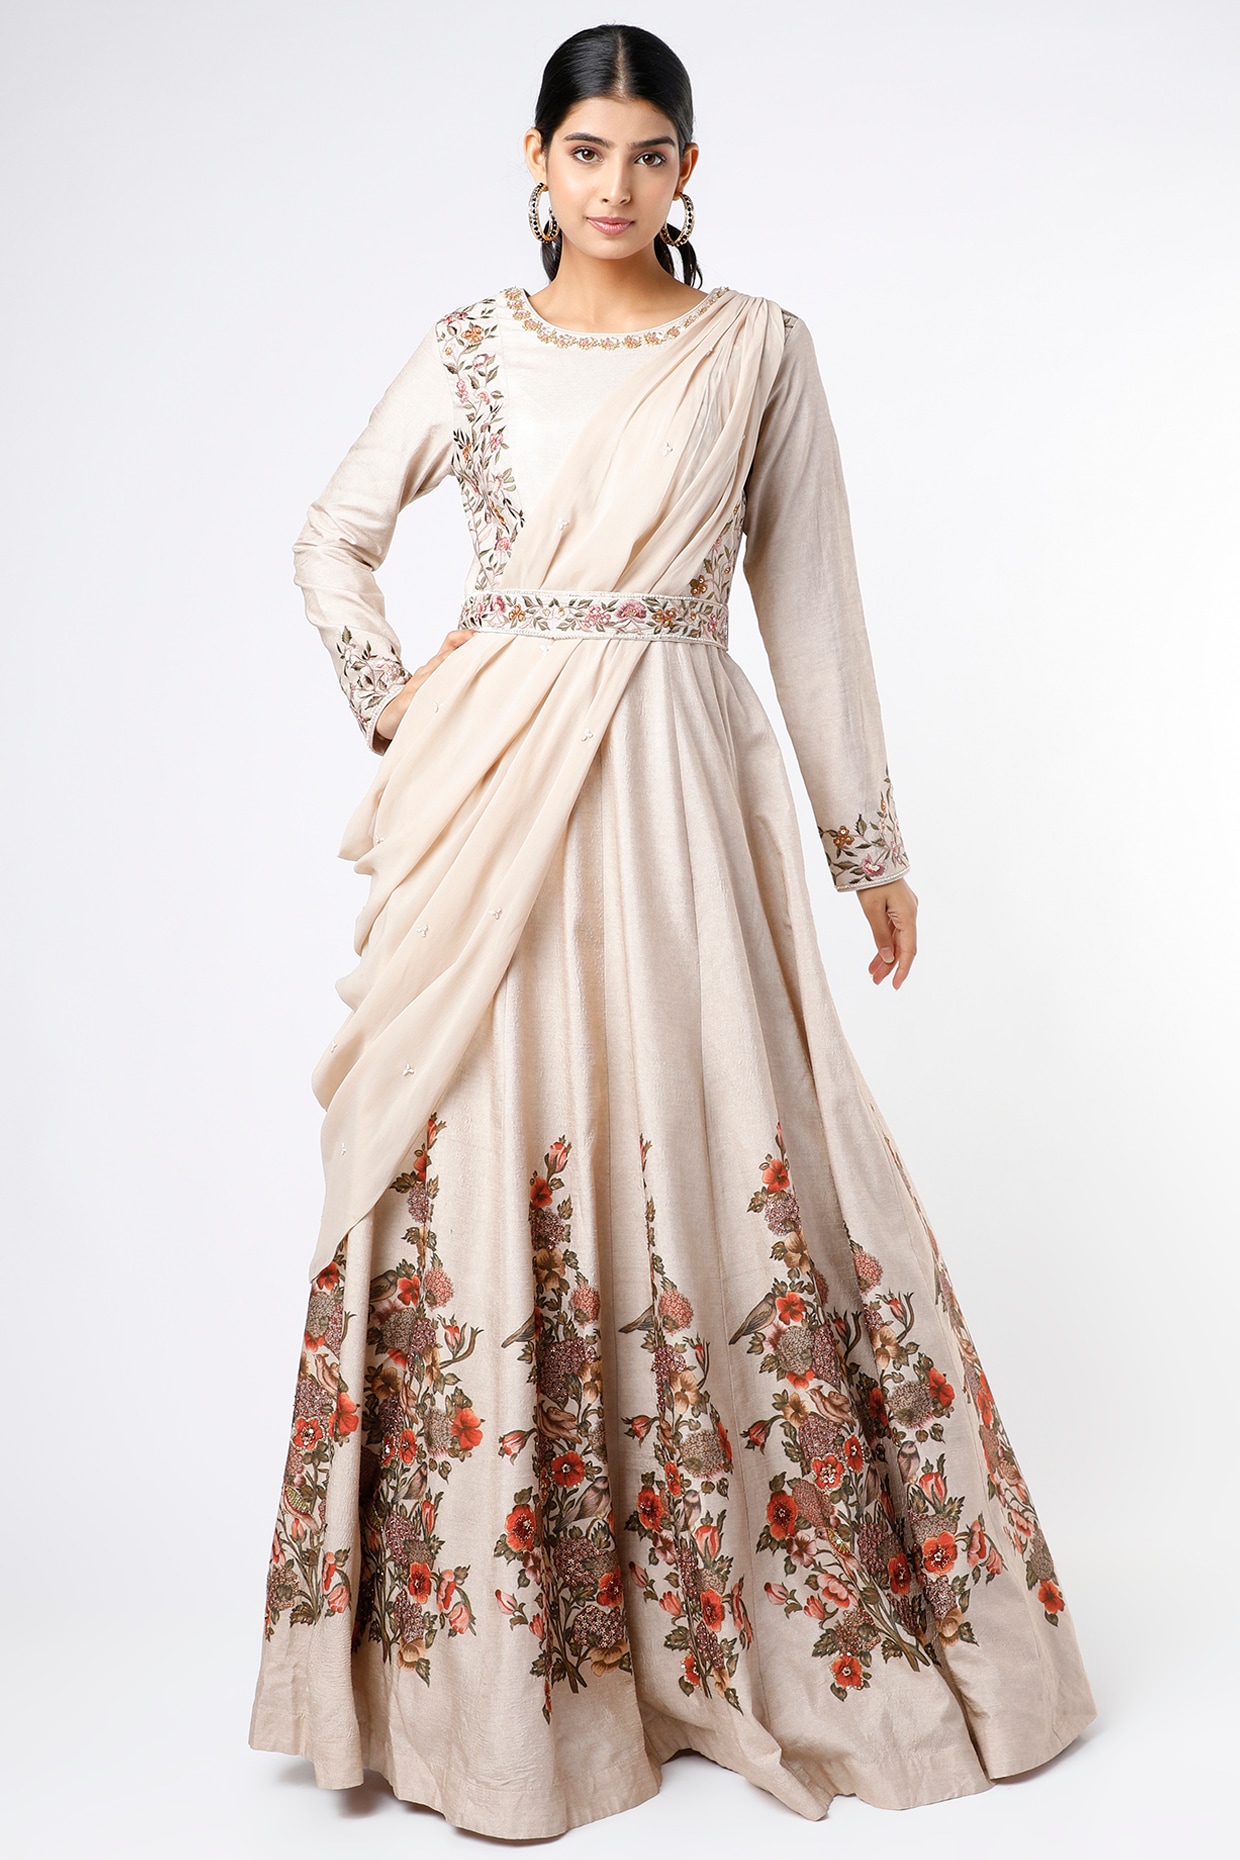 Ahalyaa Blue & White Floral Print Ethnic Maxi Dress with Attached Dupatta -  Absolutely Desi